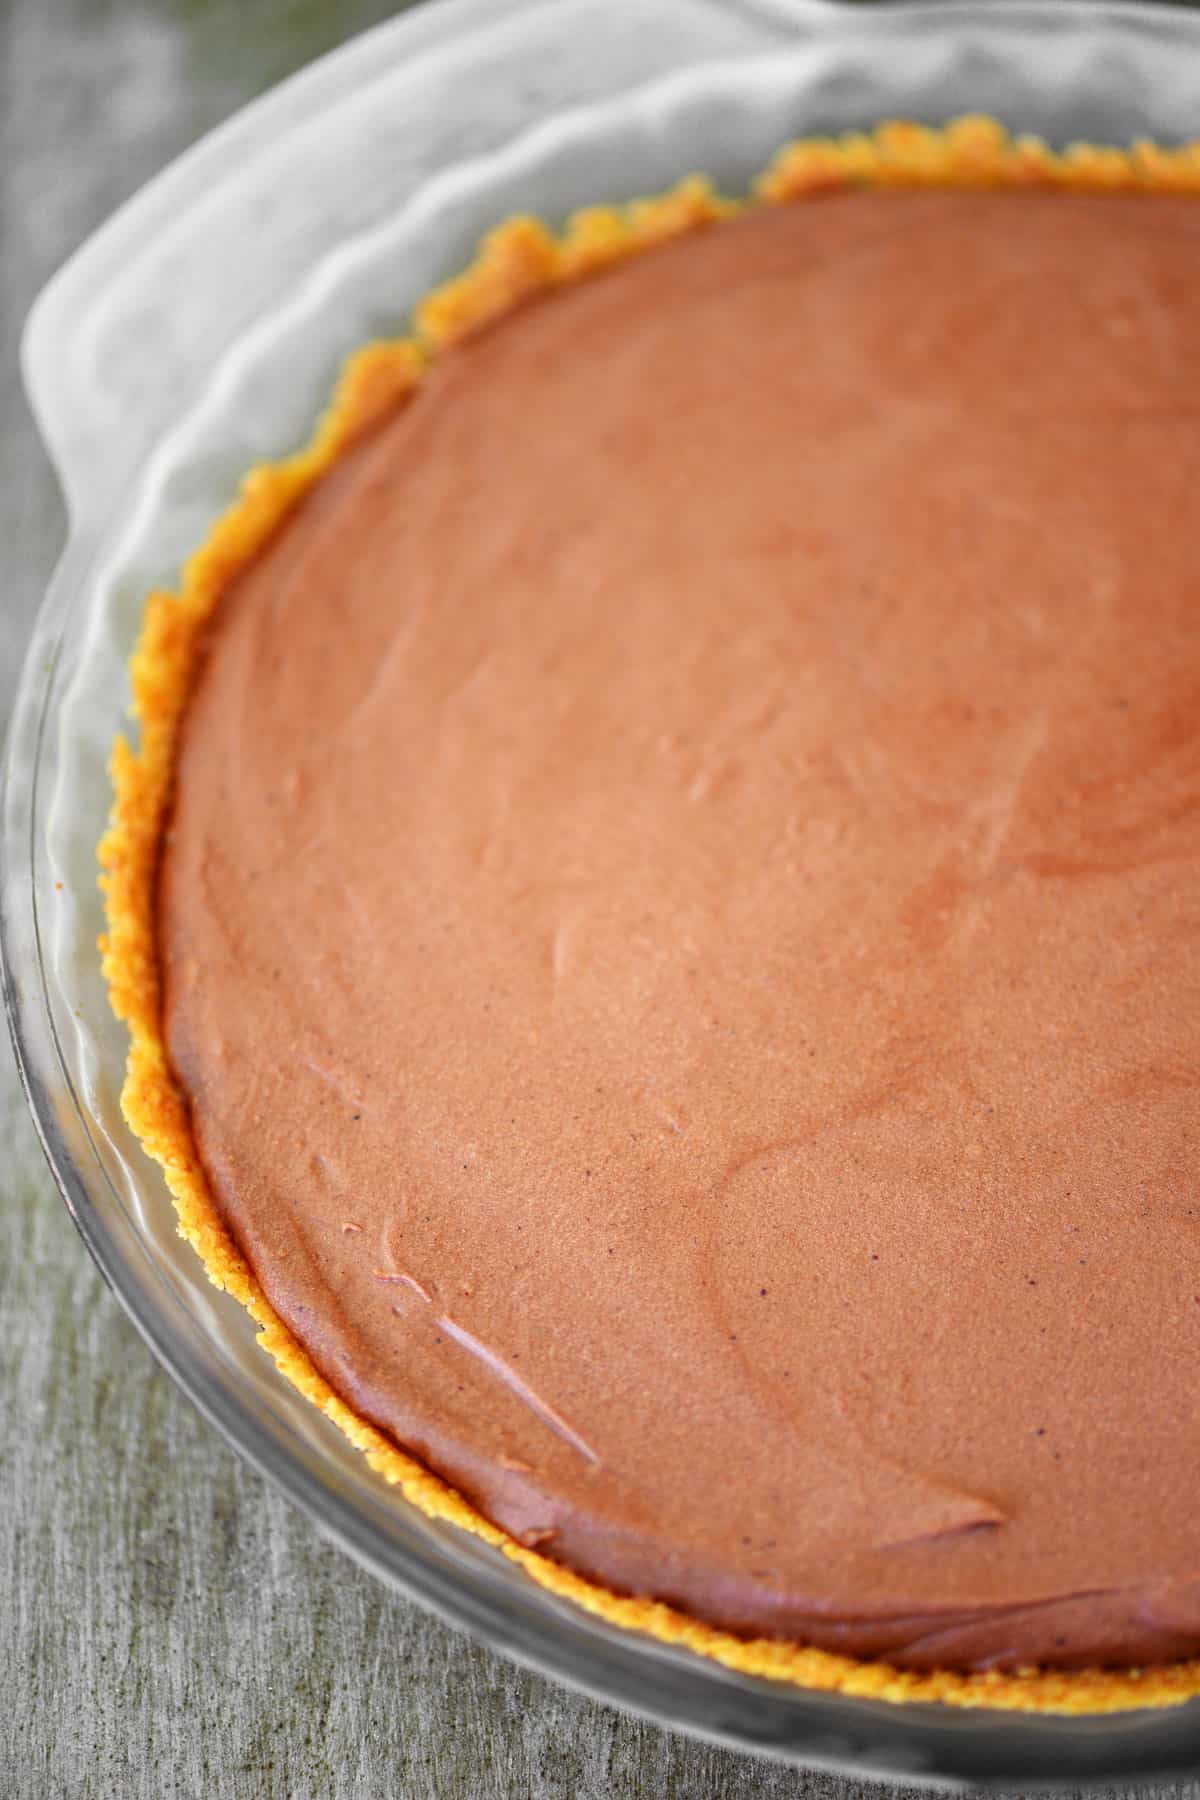 Chocolate mousse in a pie crust.